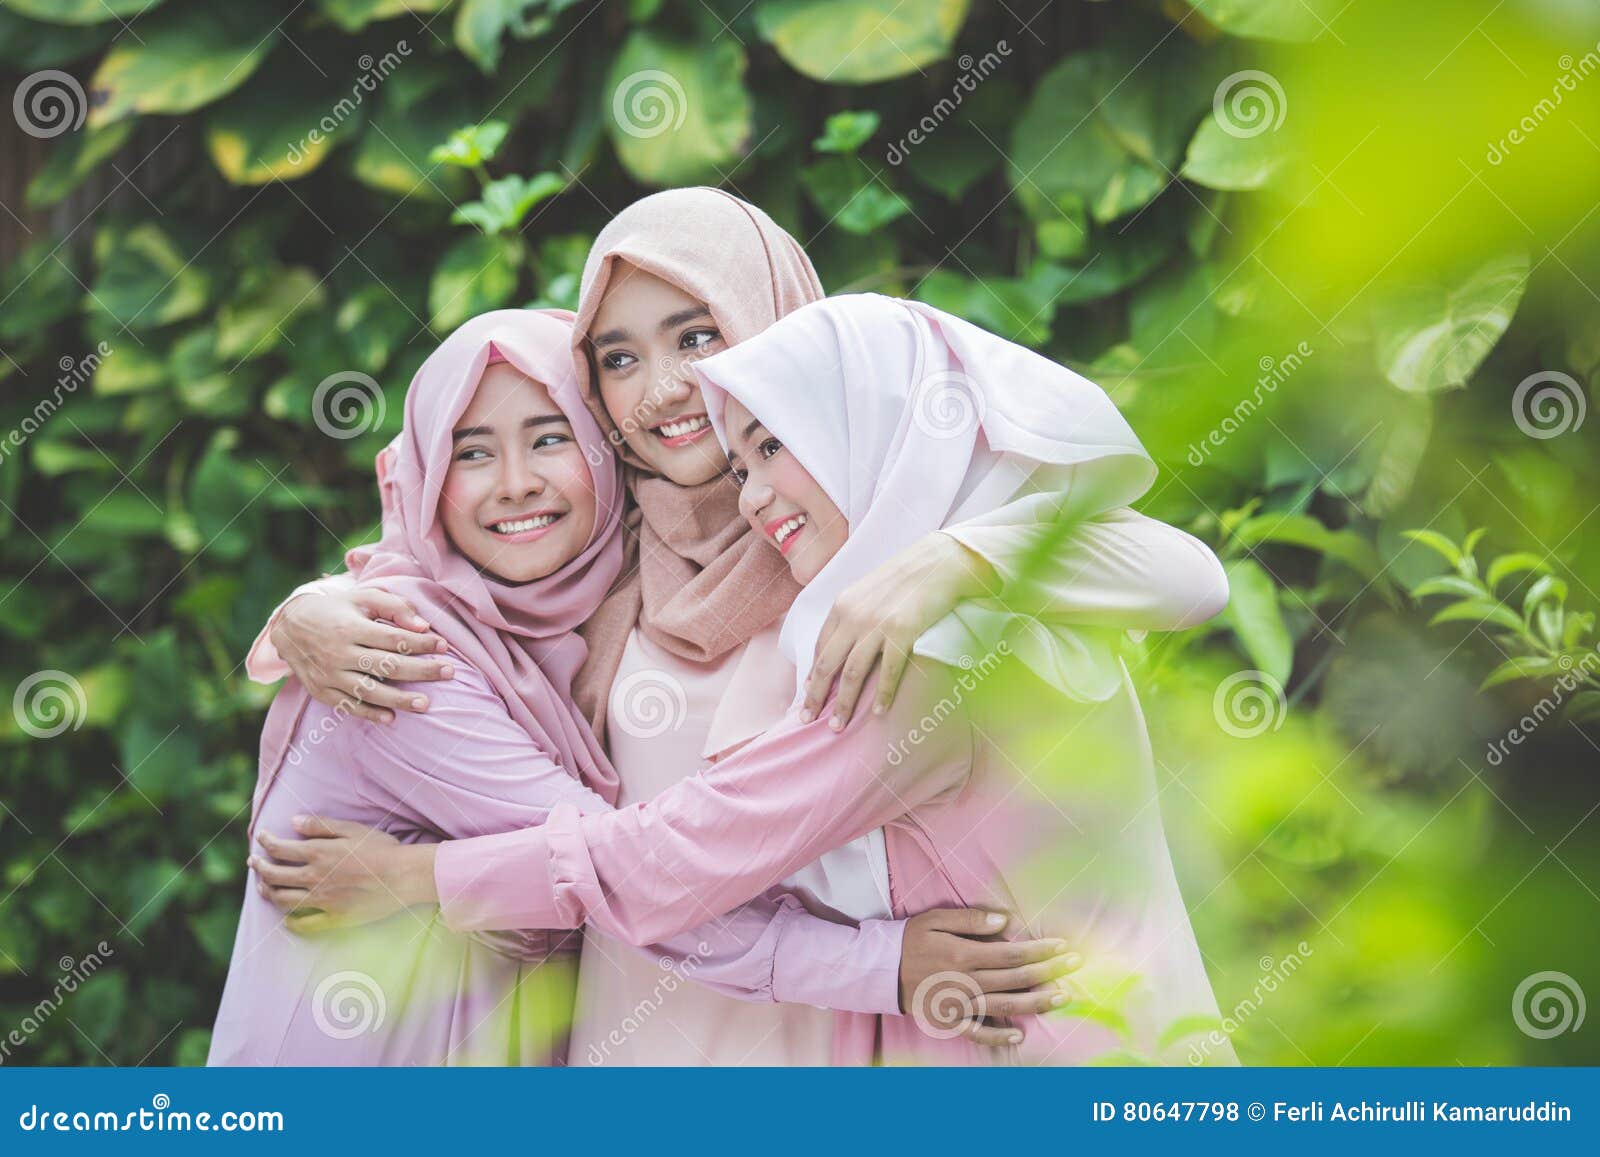 Happy Girl Best Friend Together Stock Photo - Image of close ...